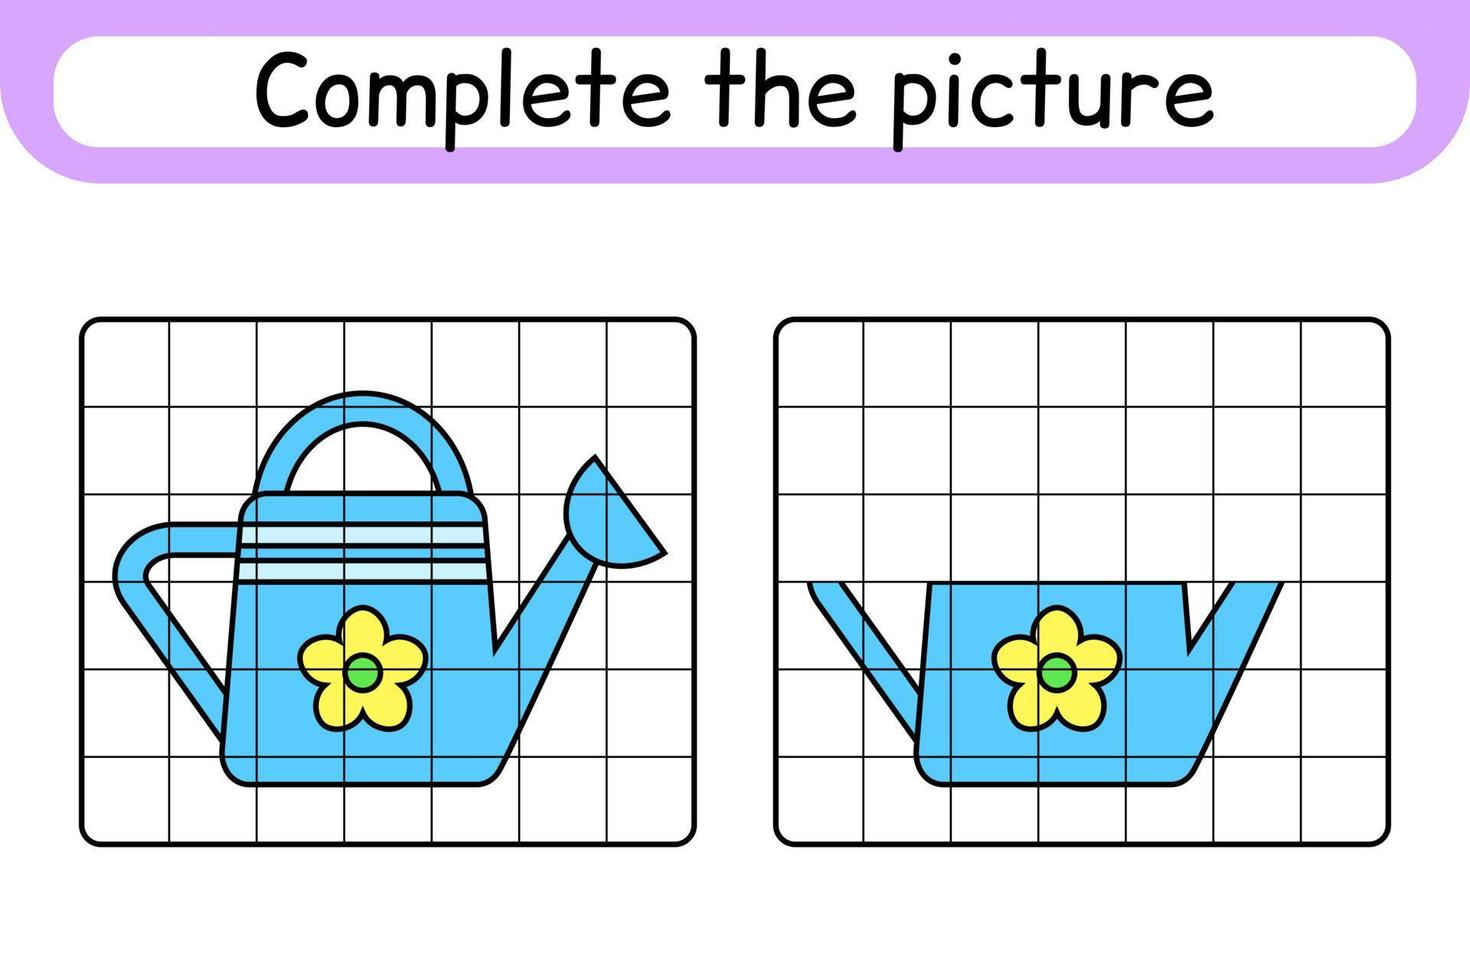 Complete the picture watering can. Copy the picture and color. Finish the image. Coloring book. Educational drawing exercise game for children vector